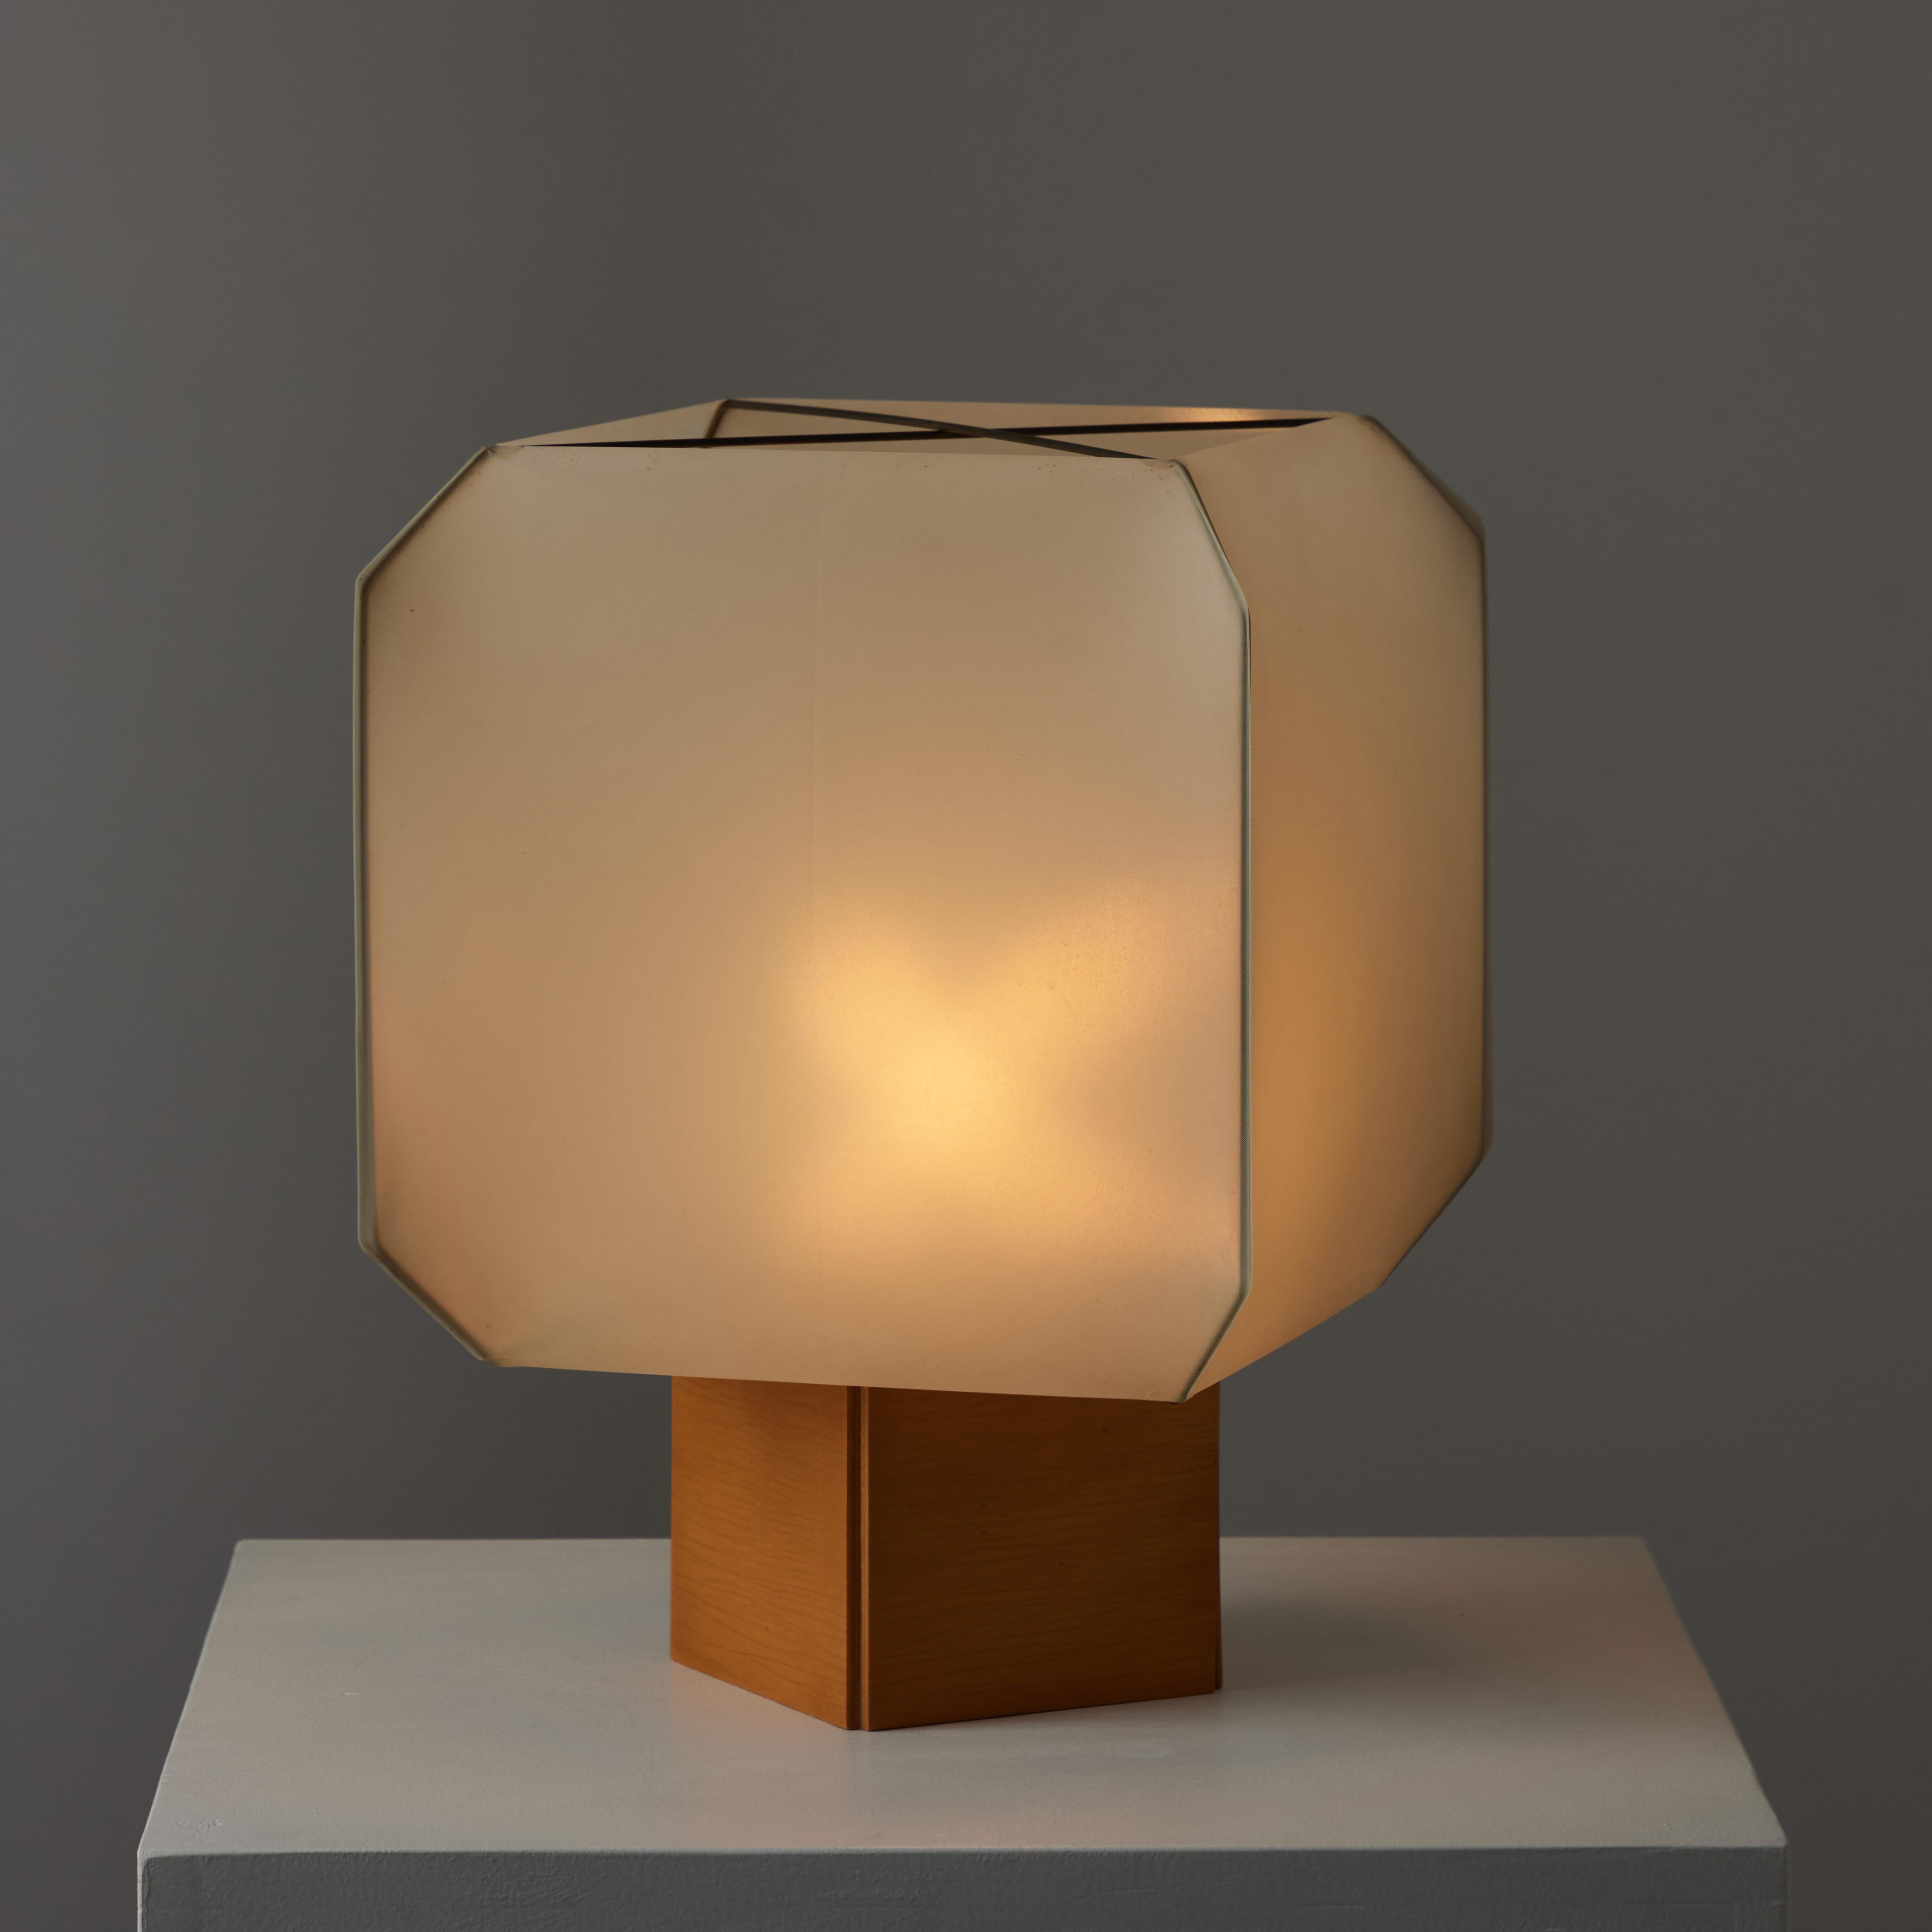 Bali table lamp by Bruno Munari for Danese. Designed and manufactured in Italy, 1958. Resin fabric shade and wooden base. Original cord with on/off switch. Holds a single E27 socket, adapted for the US. We recommend one 40w maximum bulb. Bulb